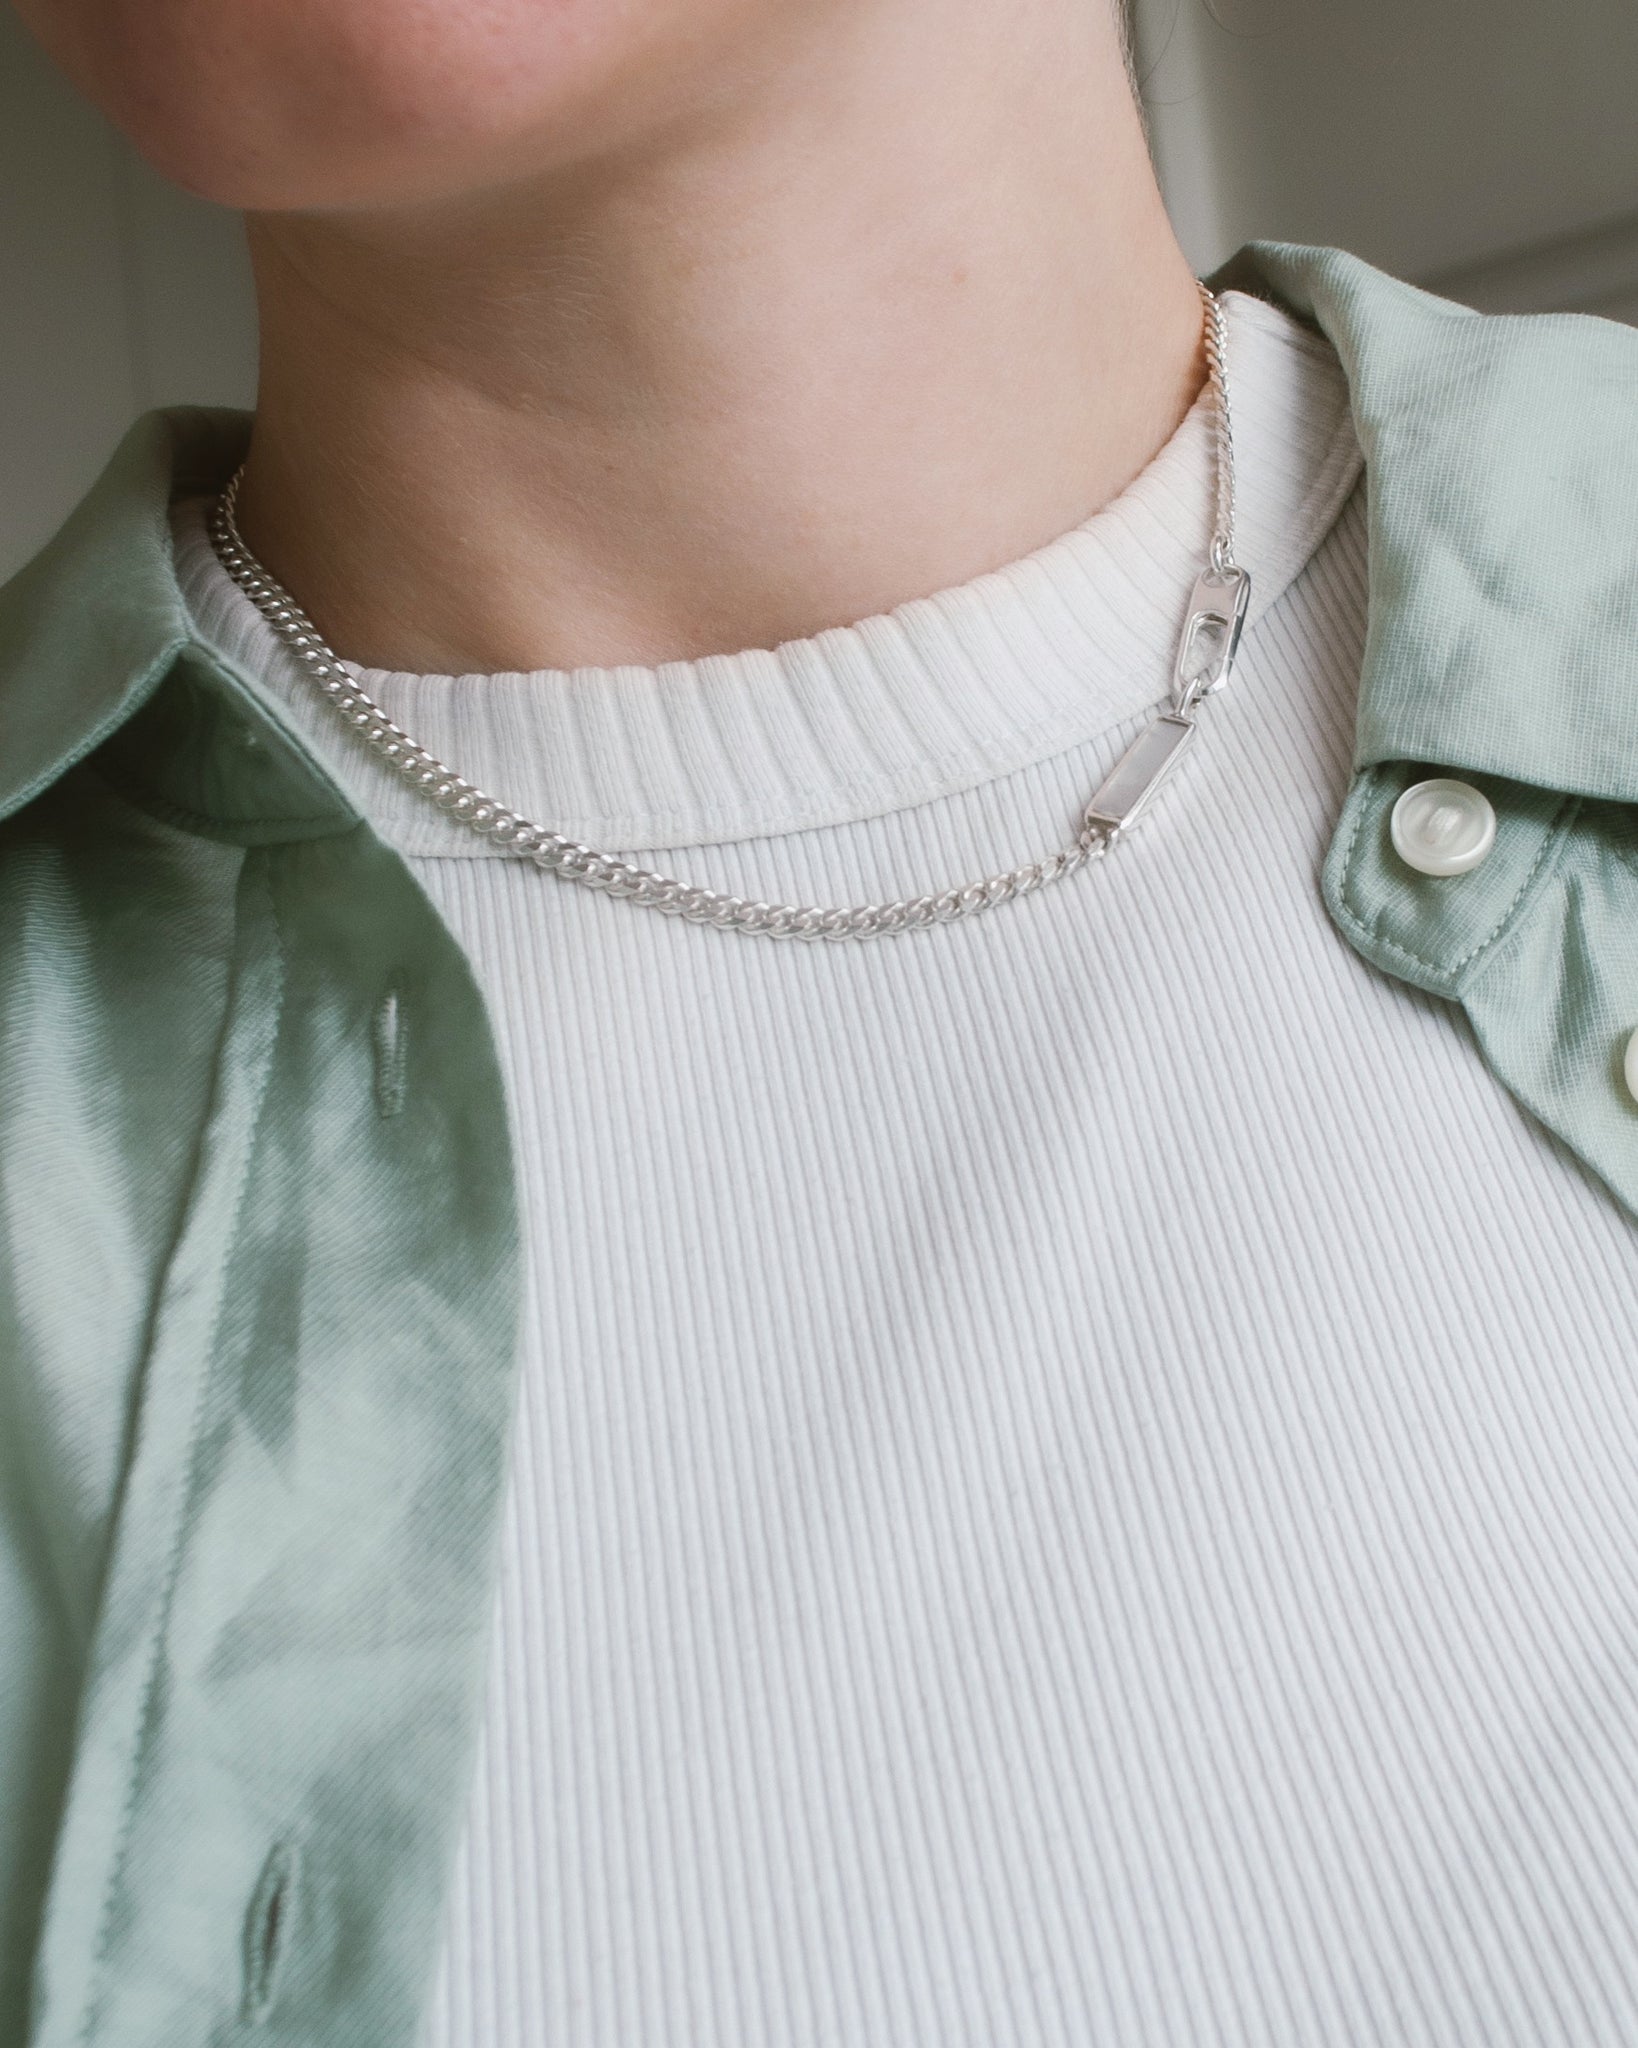 BASIN NECKLACE | MOTHER OF PEARL